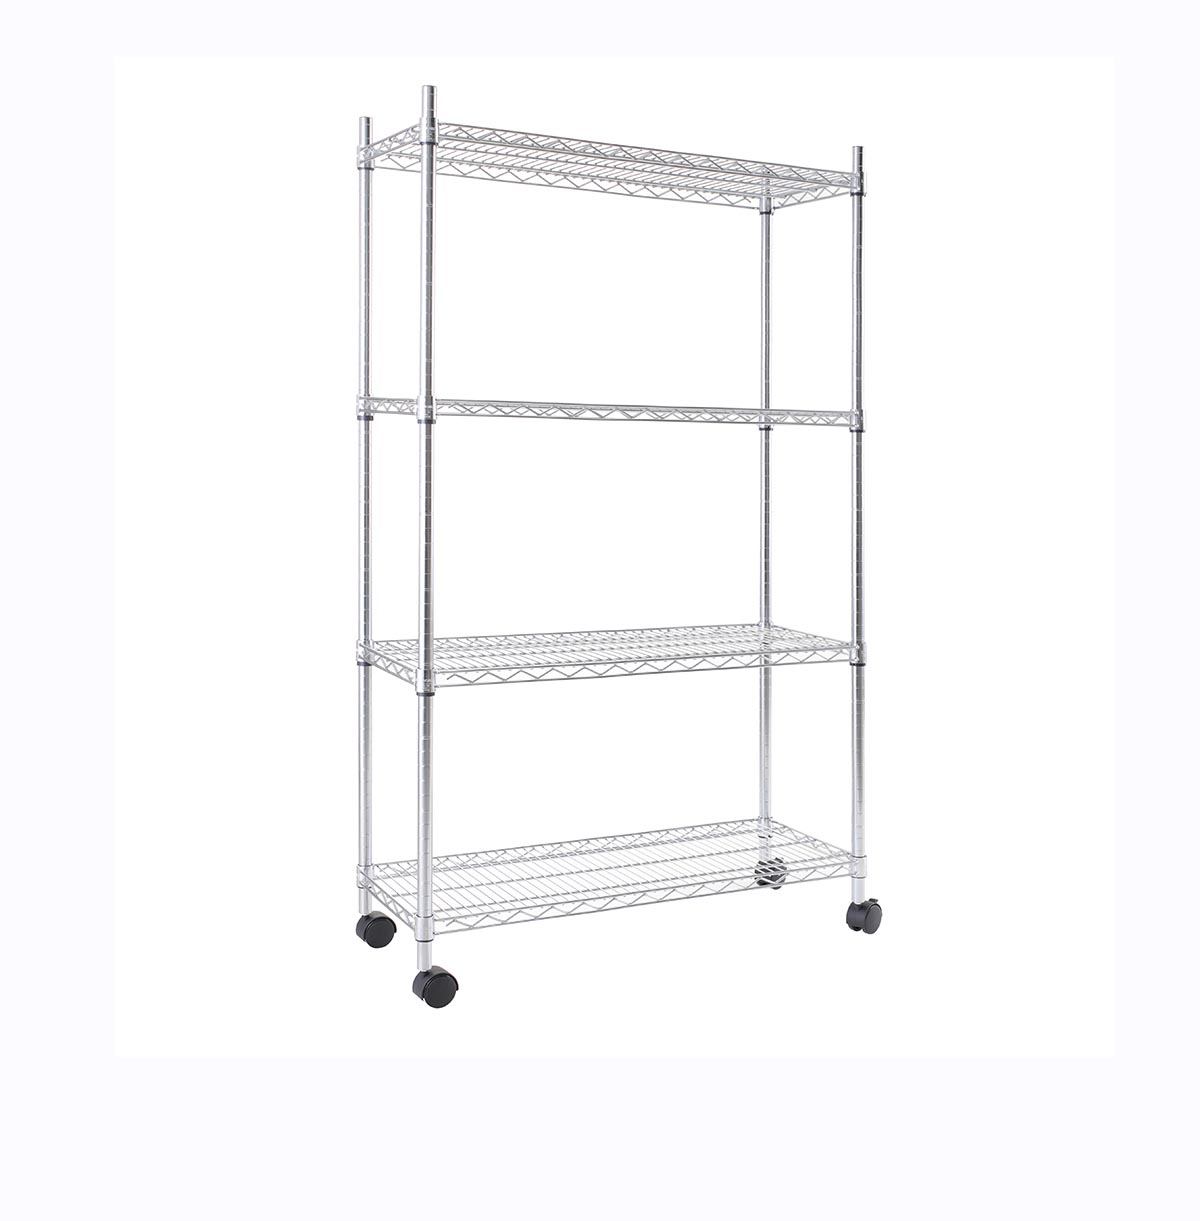 4-Tier Wire Shelf for Industry Storage / Boltless Steel Shelving Unit / Metal Wire Shelving Unit